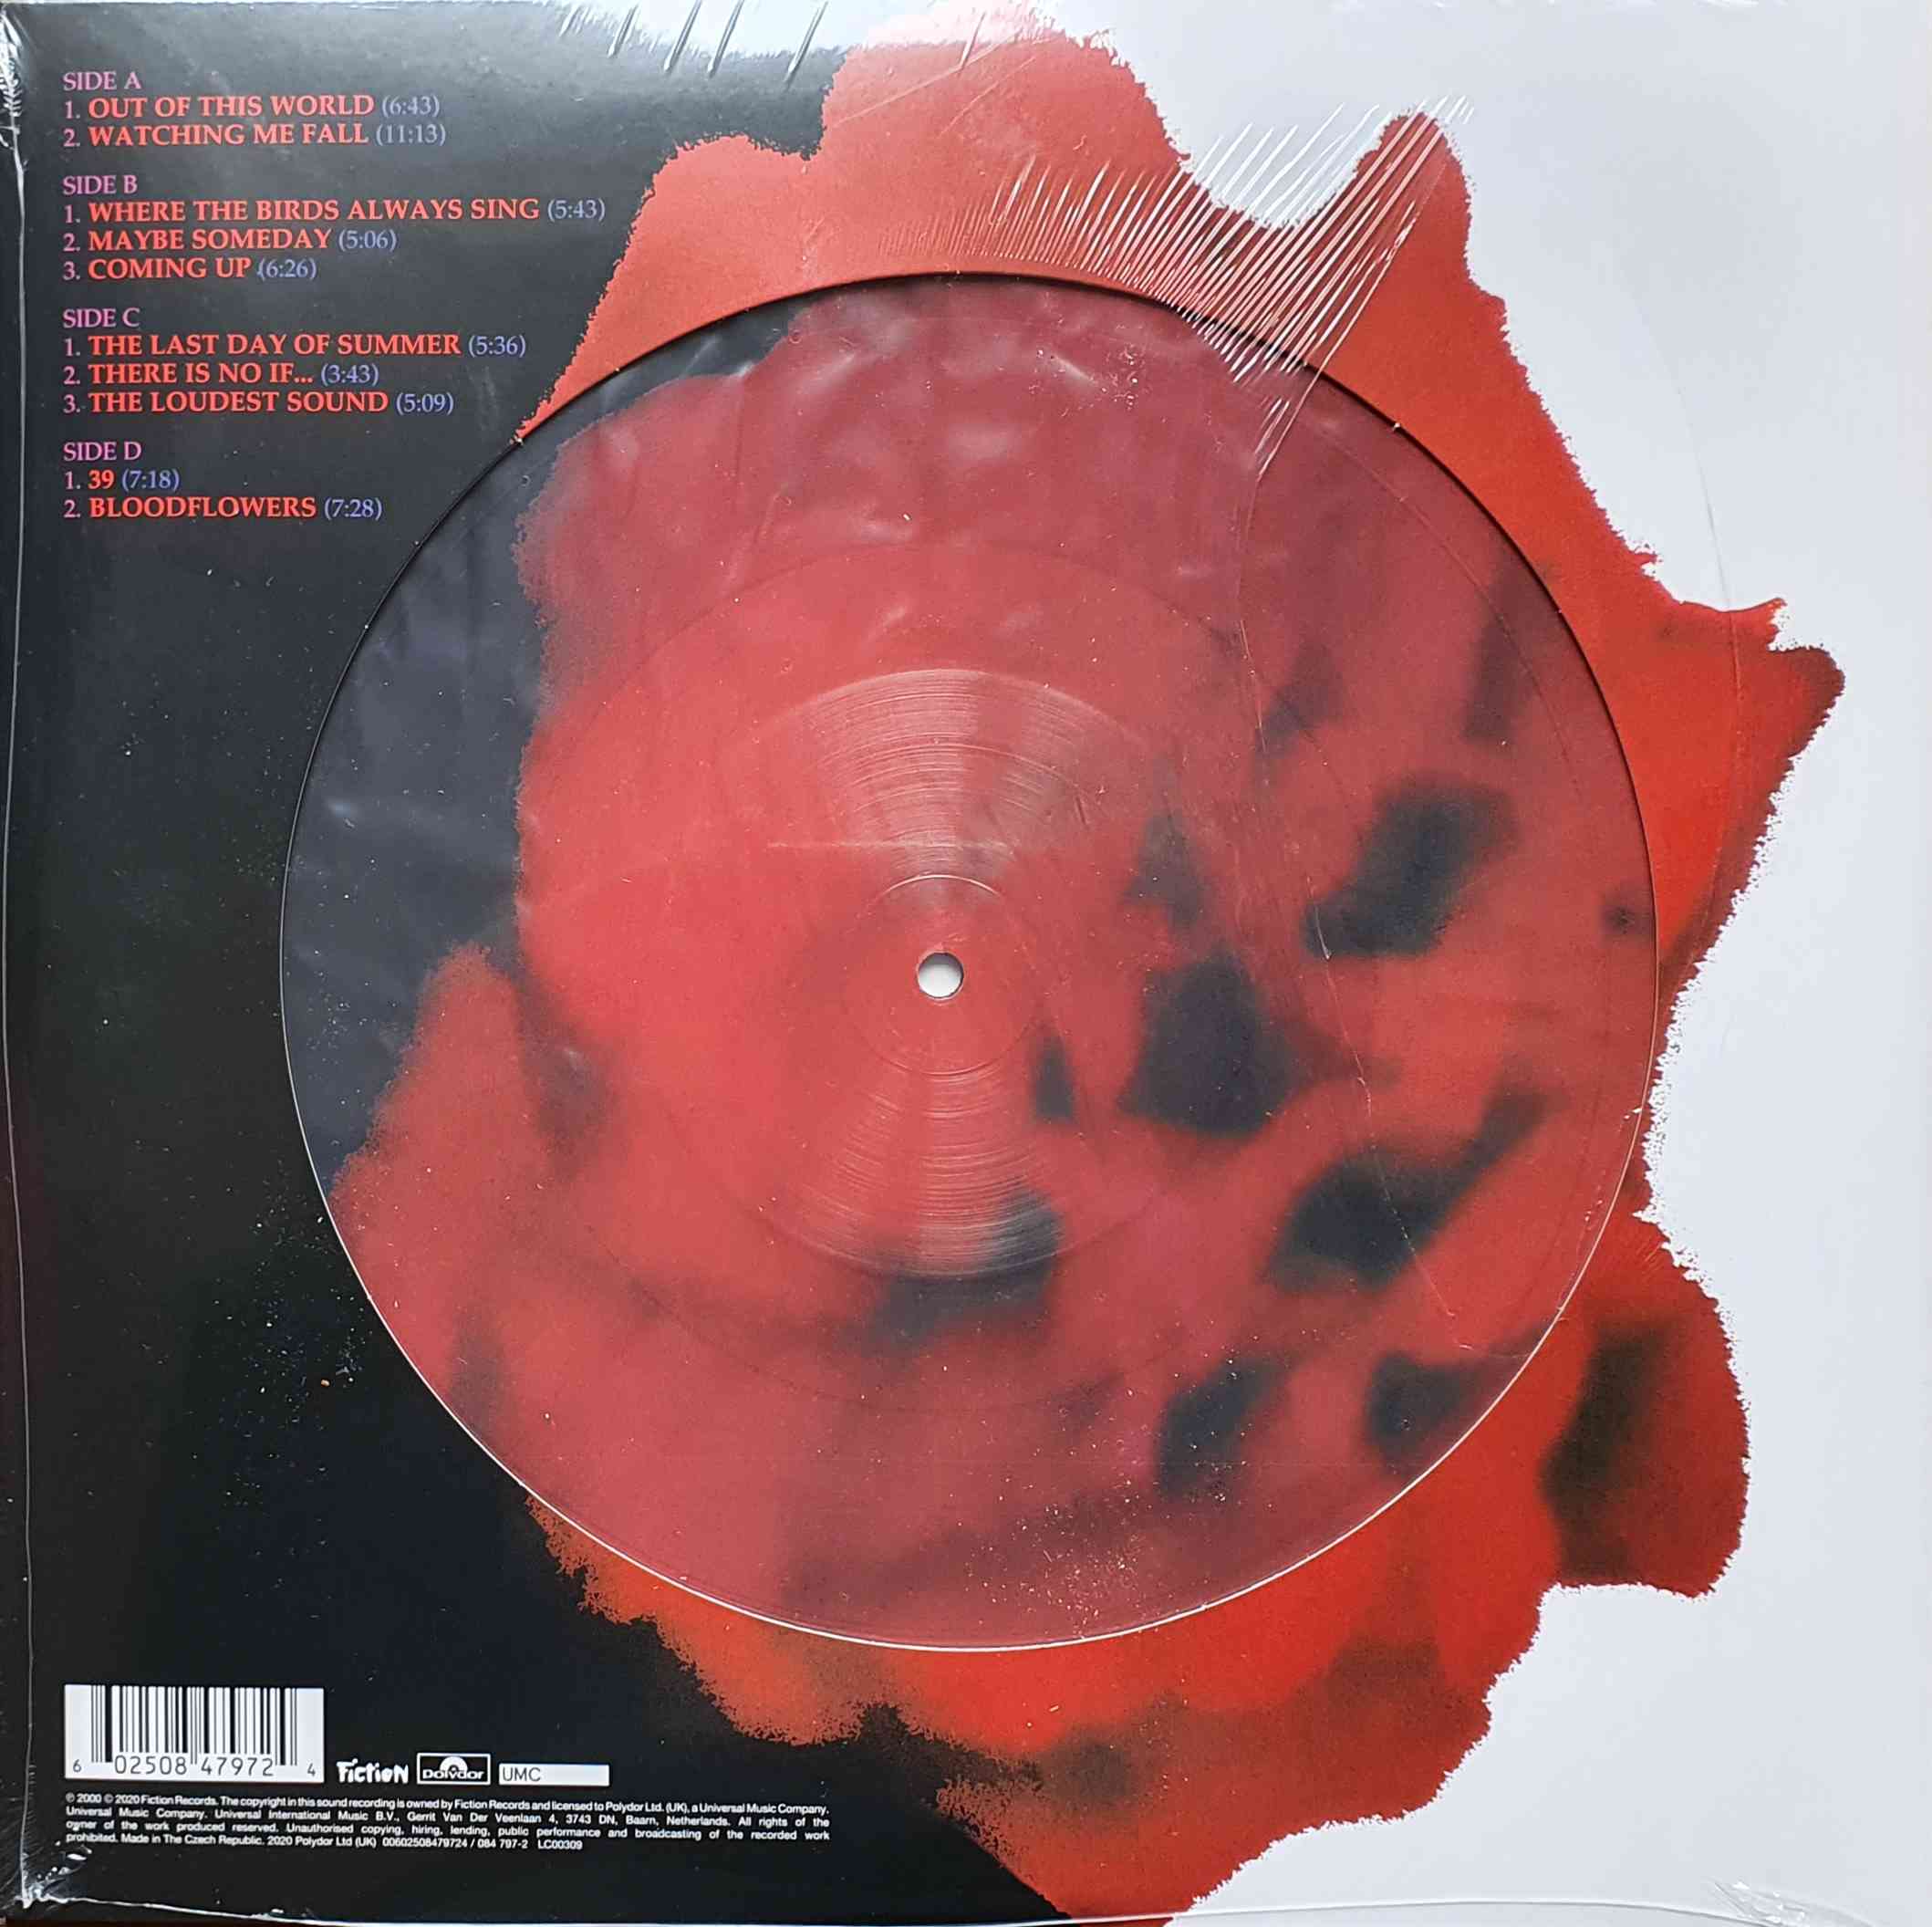 Picture of 084 797-2 Bloodflowers - Record Store Day 2020 by artist The Cure 